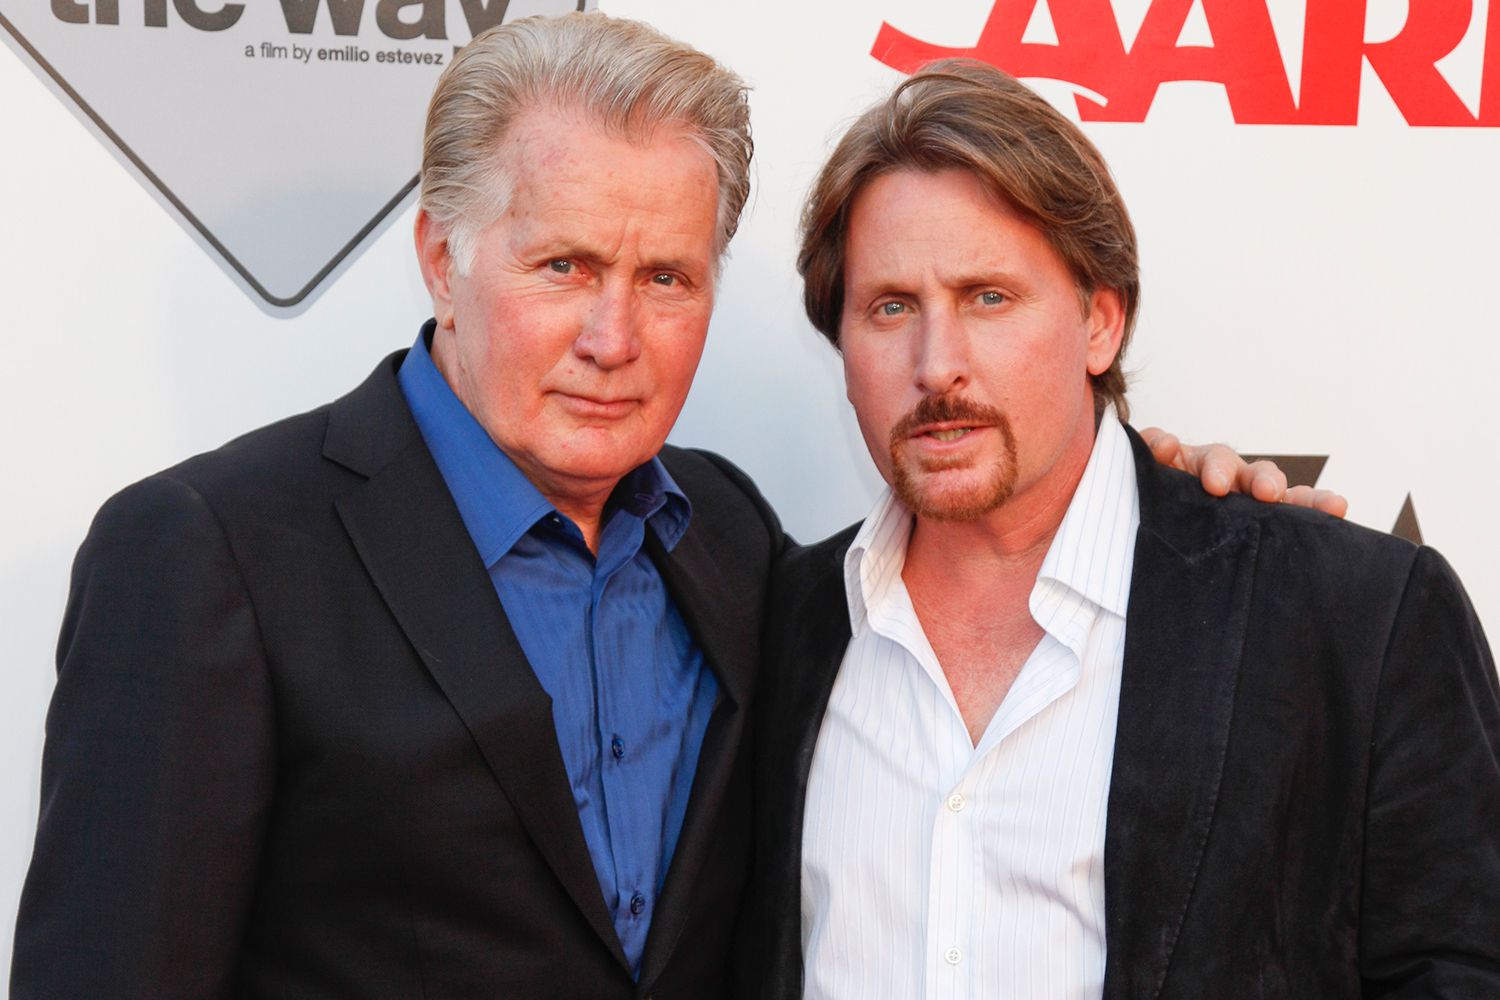 Actor Martin Sheen (L) and director Emilio Estevez attend AARP's Movies For Grown Ups Film Festival screening of "The Way" at Nokia Theatre L.A. Live on September 23, 2011 in Los Angeles, California.